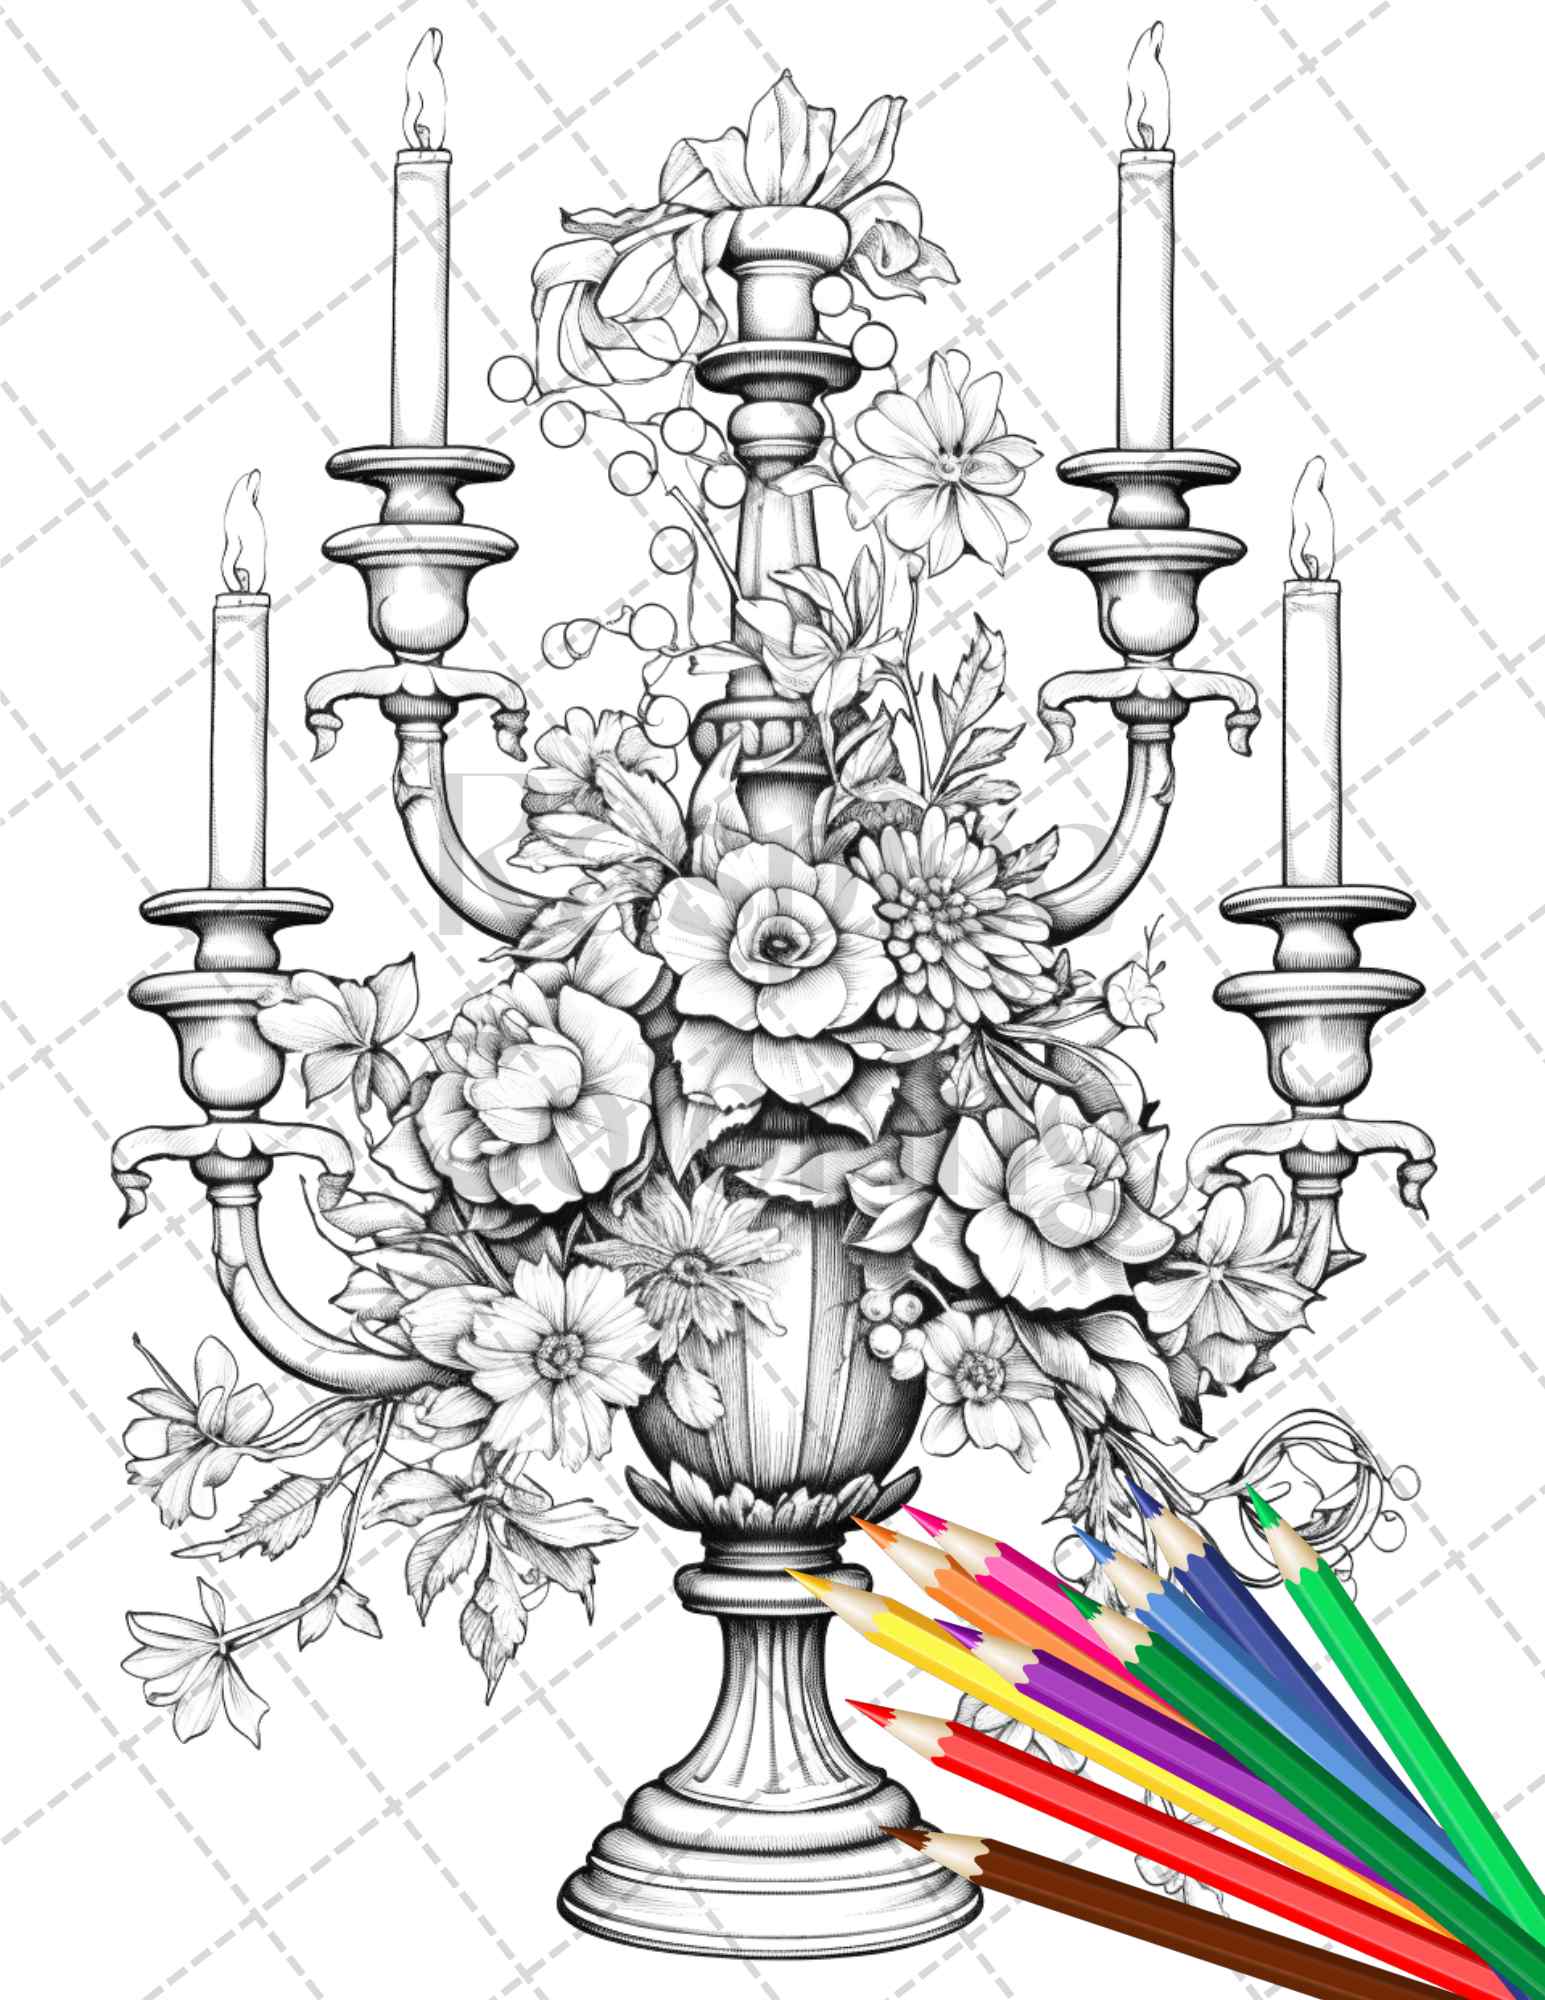 Vintage Objects Grayscale Coloring Pages Printable for Adults, Printable Grayscale Coloring Pages for Adults, Vintage Objects Coloring Book for Adults, High-Quality Grayscale Designs for Coloring, Vintage Illustrations for Adult Coloring